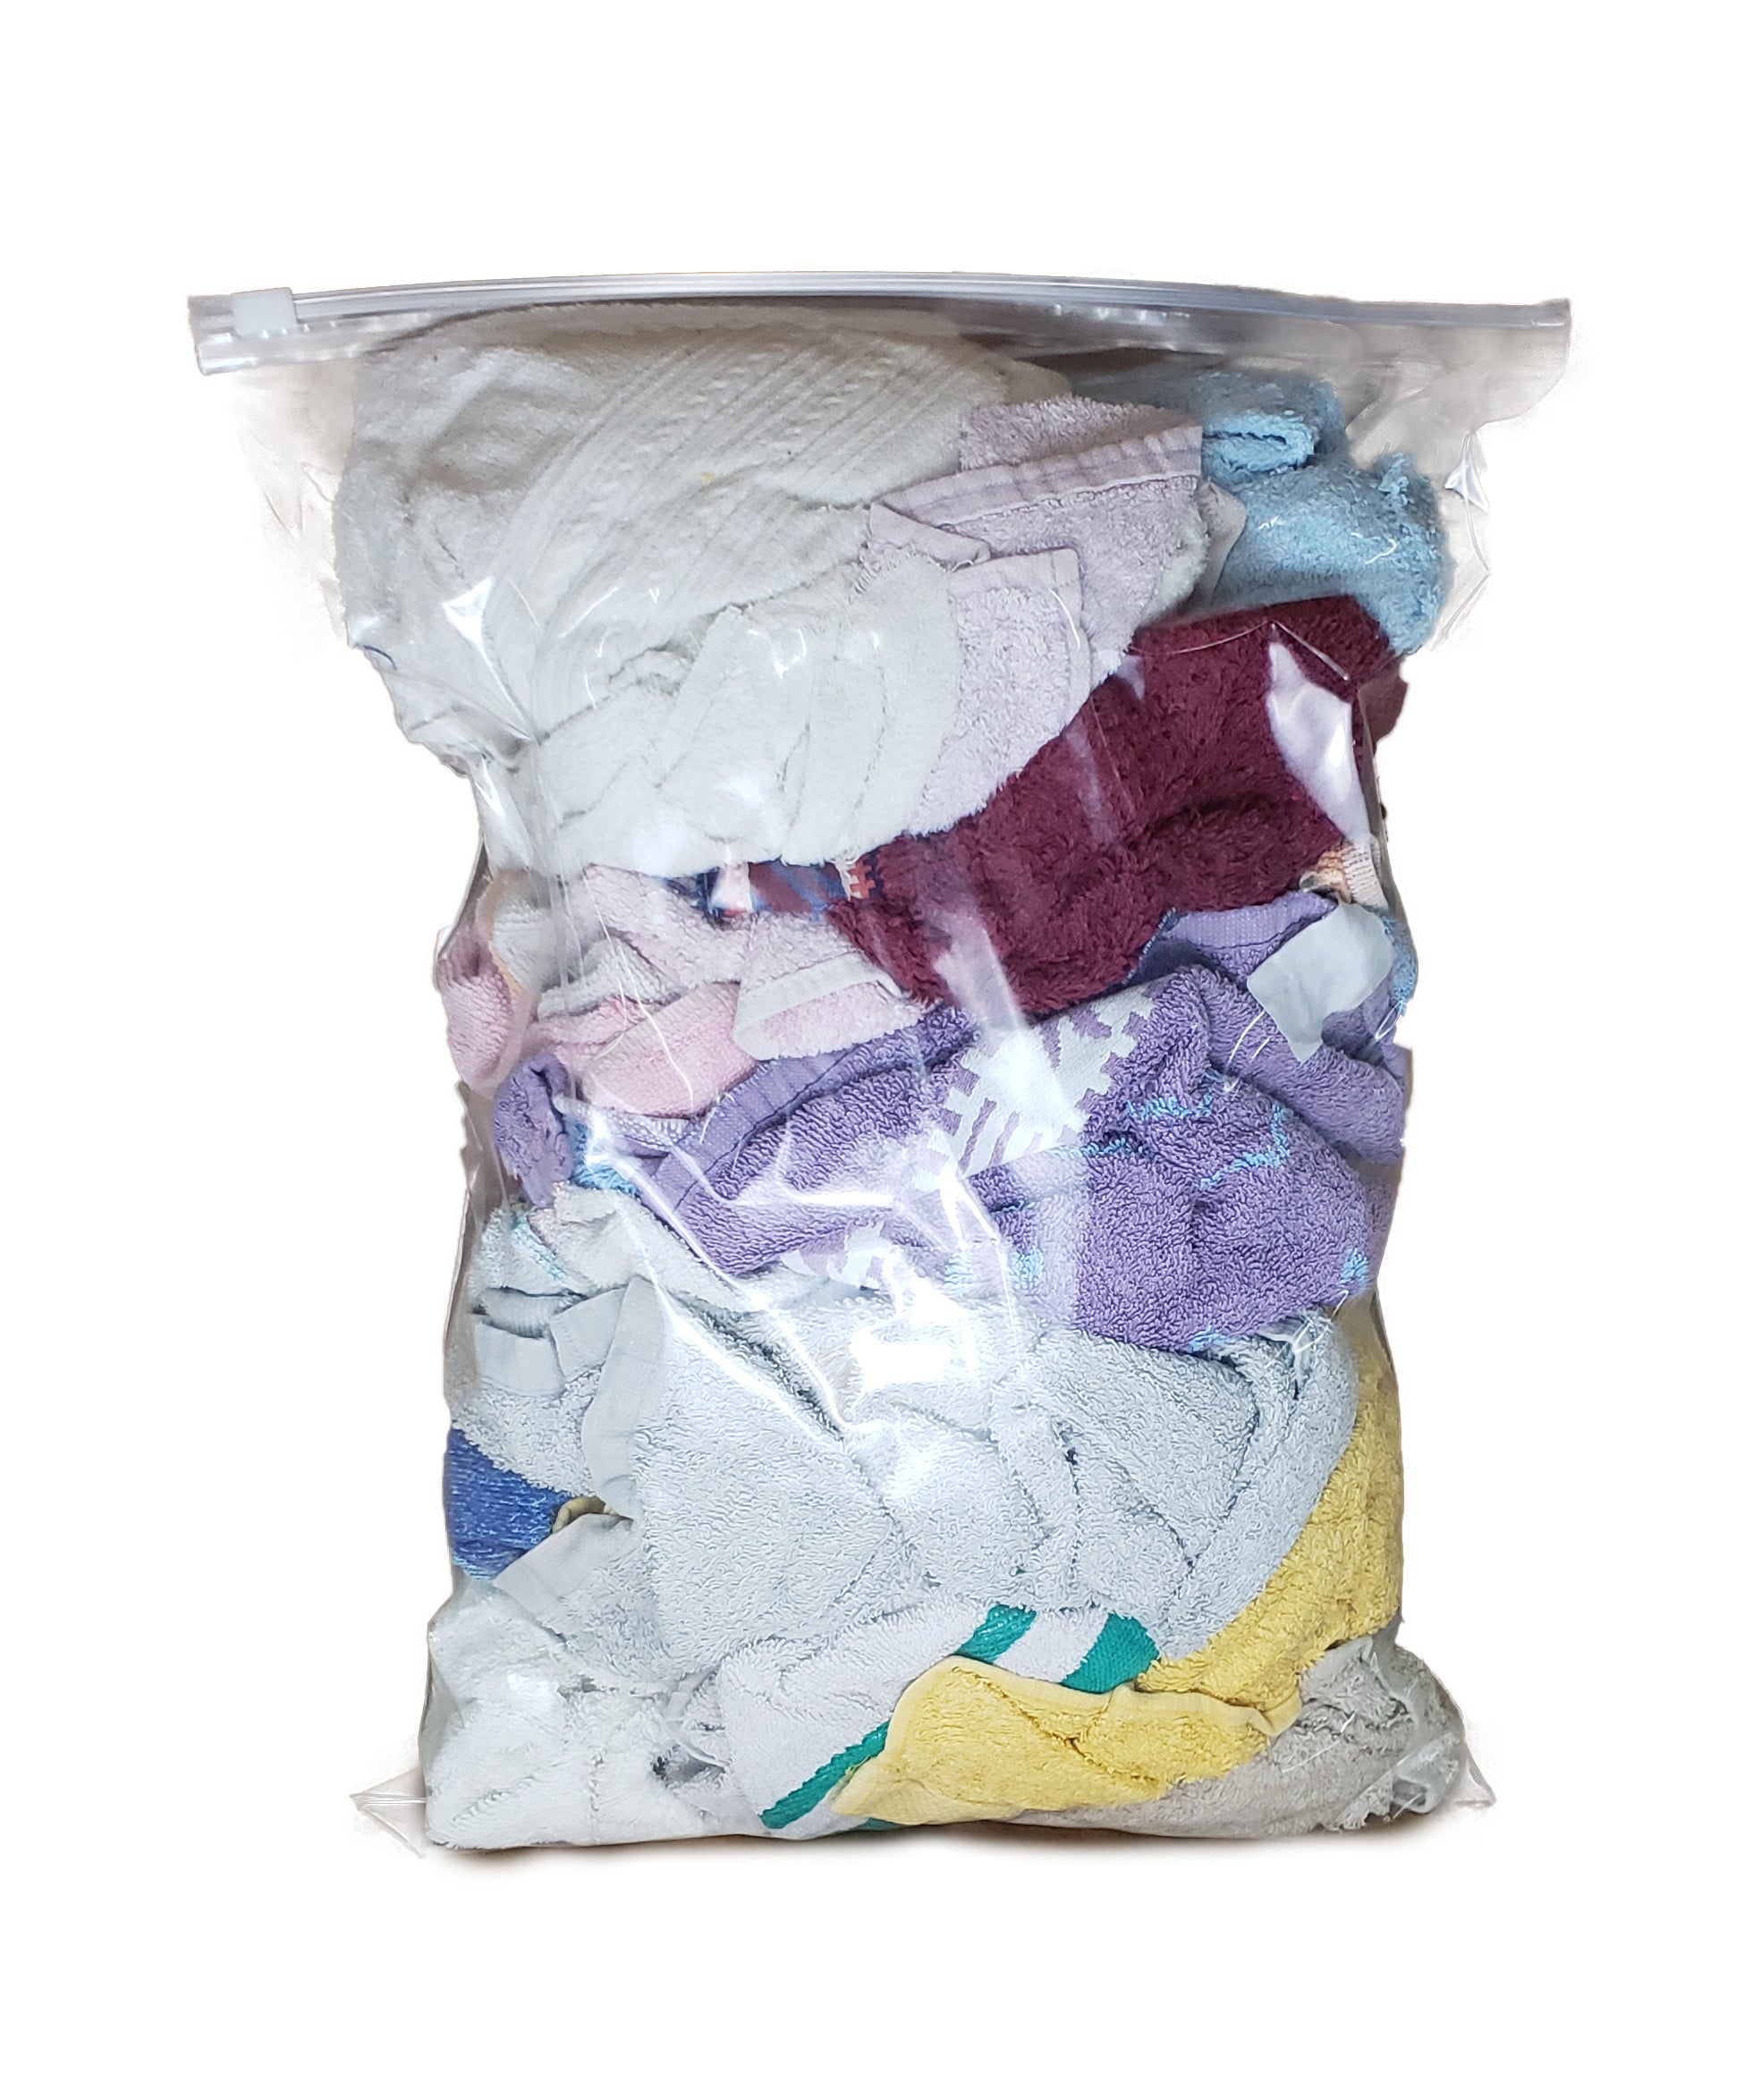 Recycled White Terry Cloth Mix – All Rags